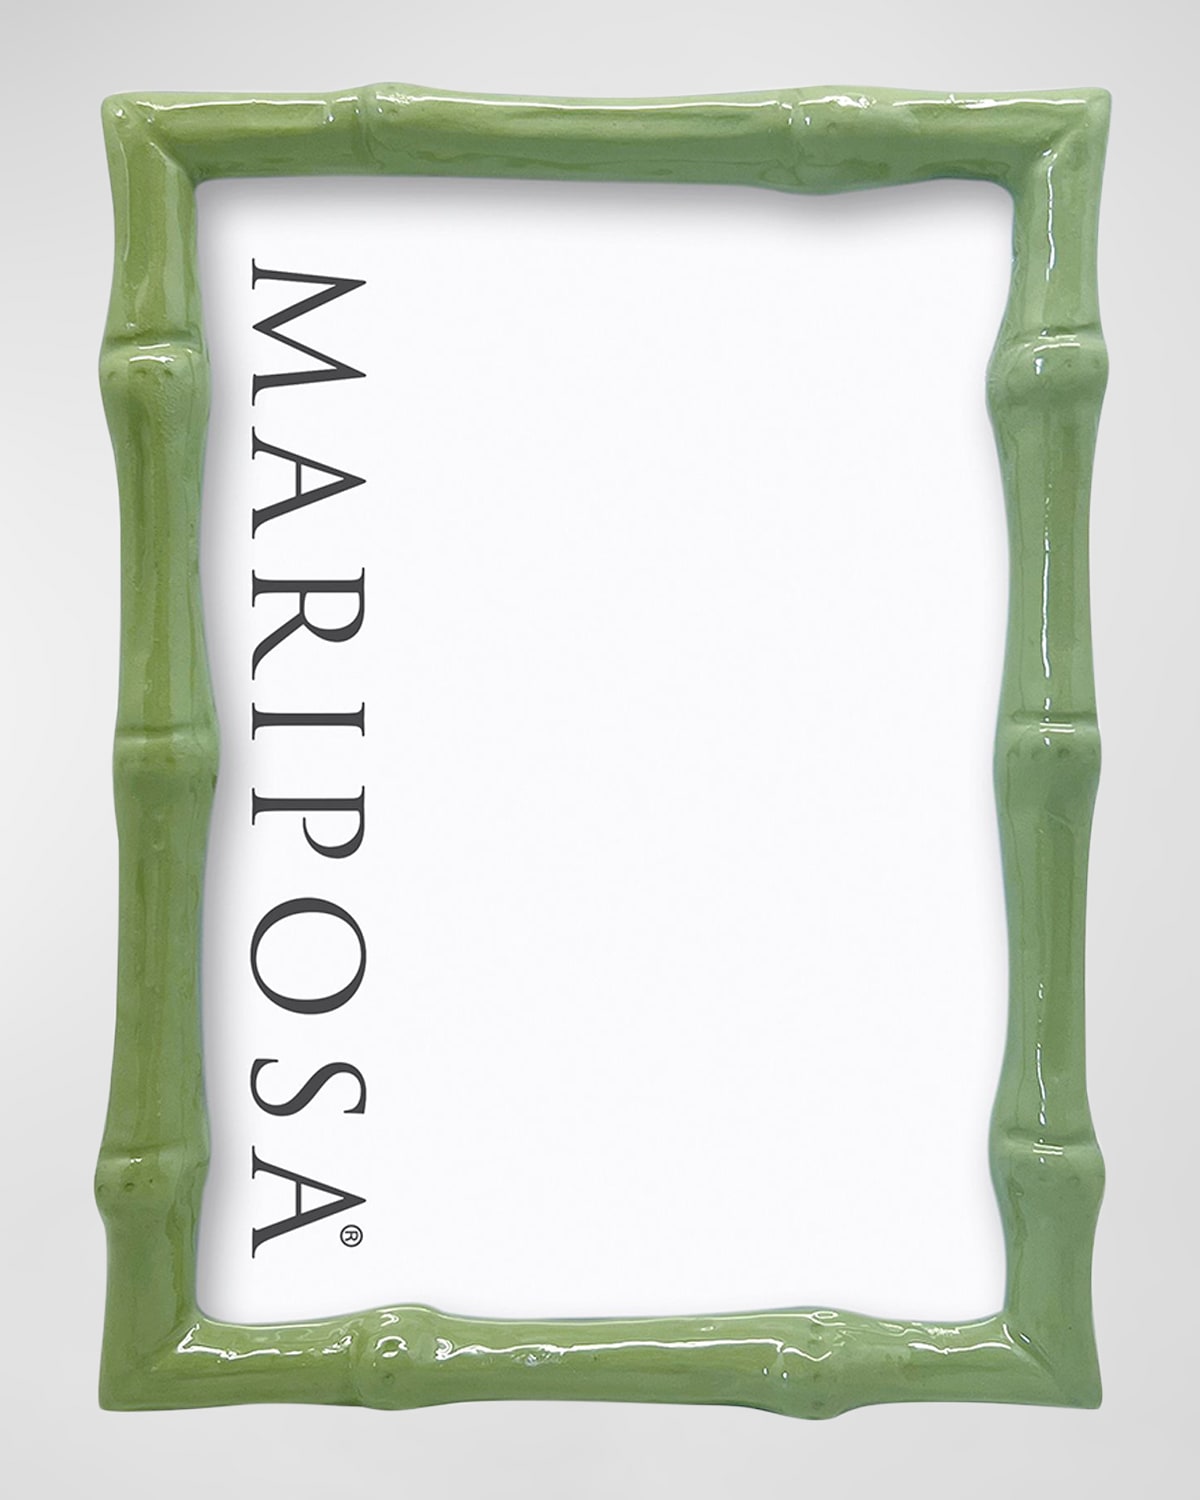 MARIPOSA BAMBOO PICTURE FRAME, 5" X 7"